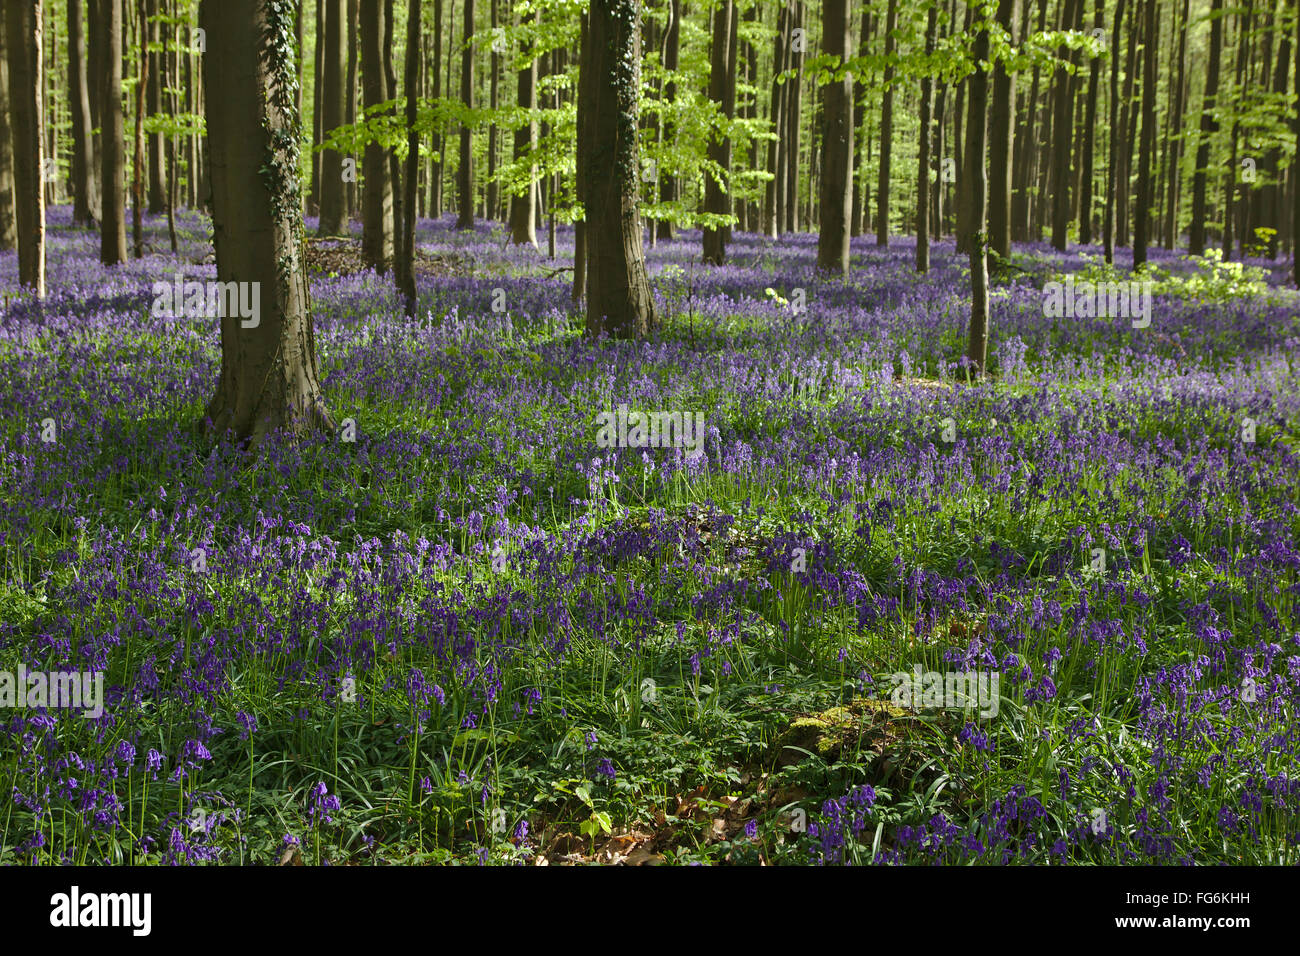 Spring forest with bluebells (Hyacinthoides non-scripta) in Hallerbos (Bois de Halle, forest of Halle), Belgium Stock Photo